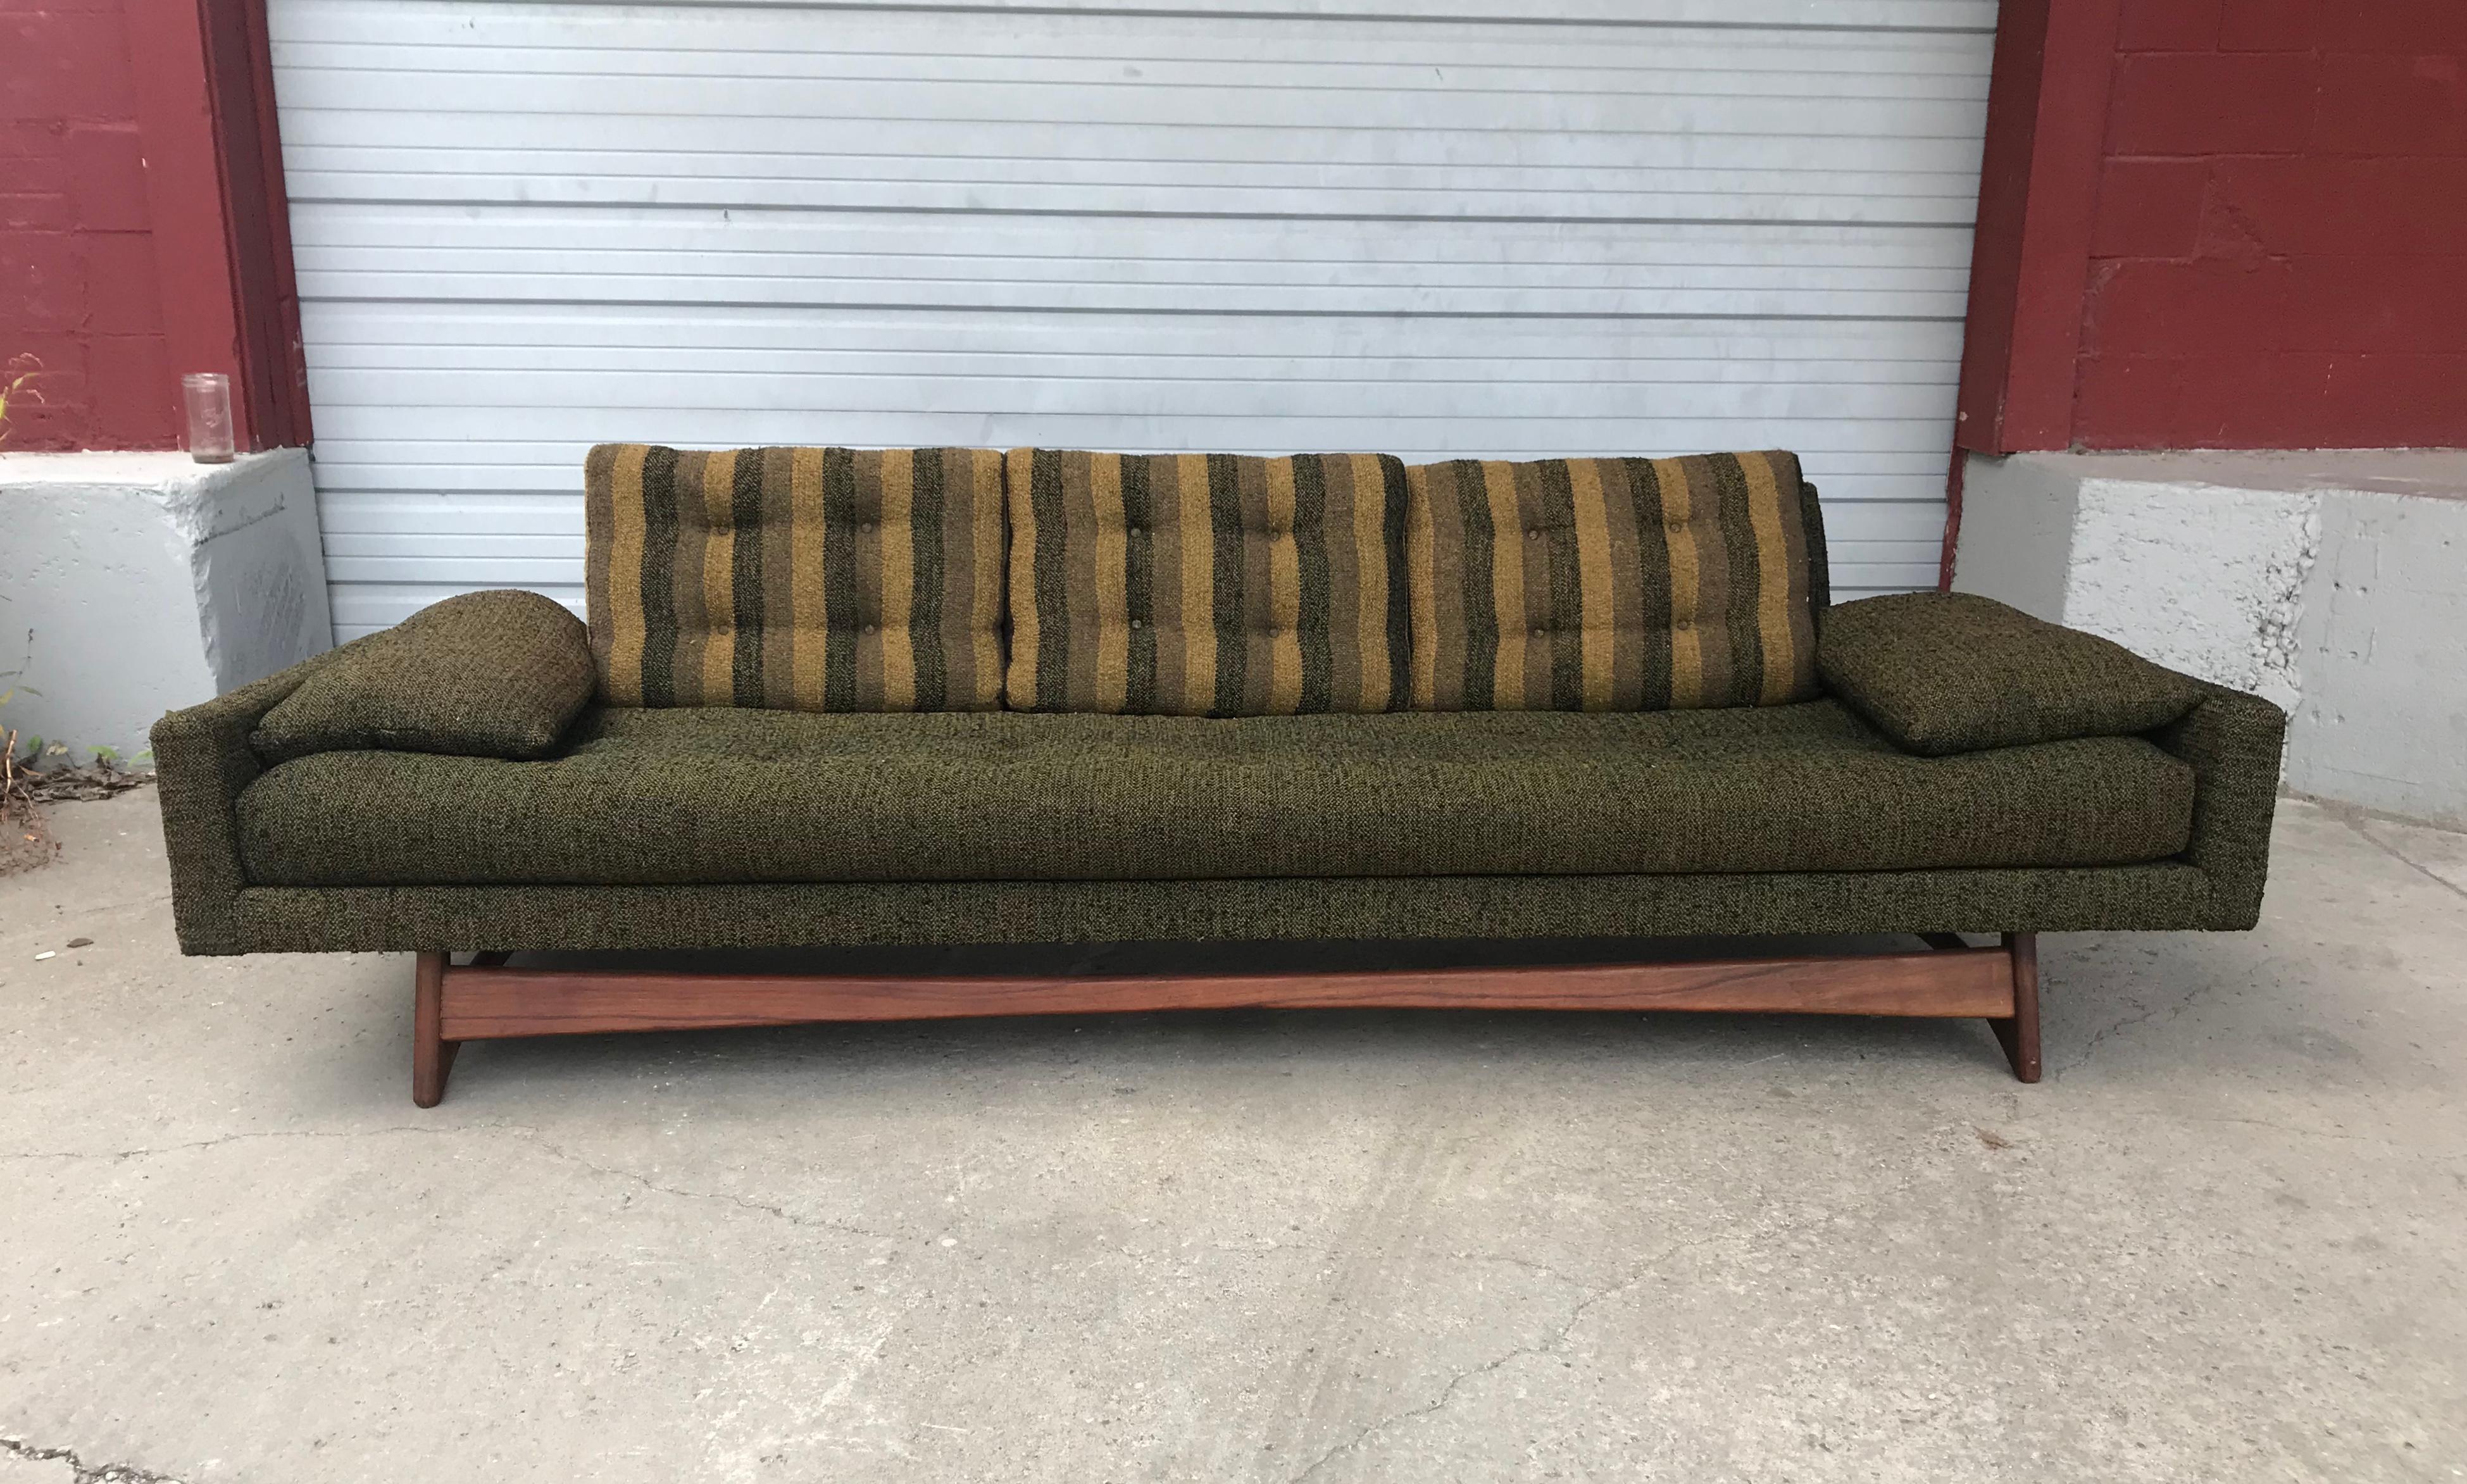 Stunning modernist sofa by Adrian Pearsall for Craft Associates, classic design, retains original wool fabric upholstery in amazing original ciondition. Sculpted walnut wood base, extremely comfortable, hand delivery avail to New York City or